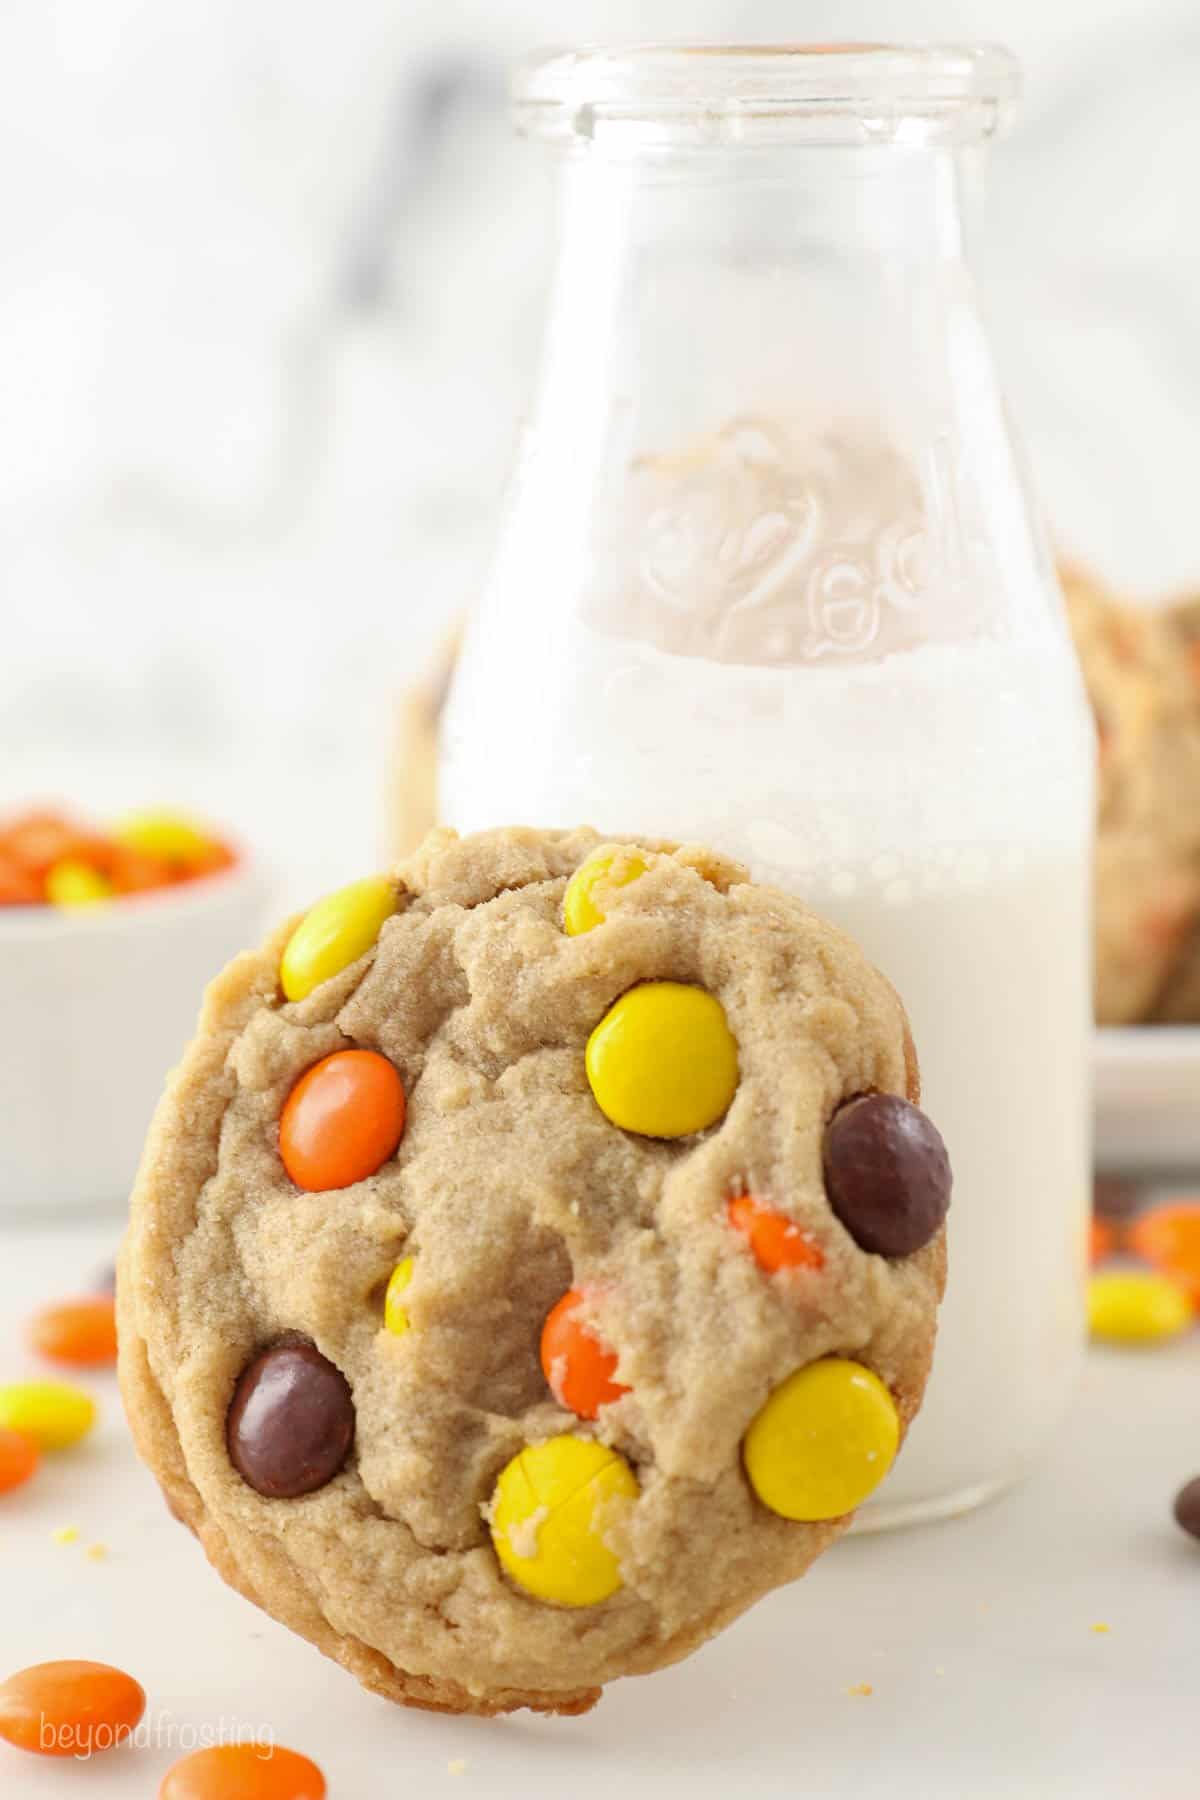 A Reese's peanut butter cookie learning against a glass of milk